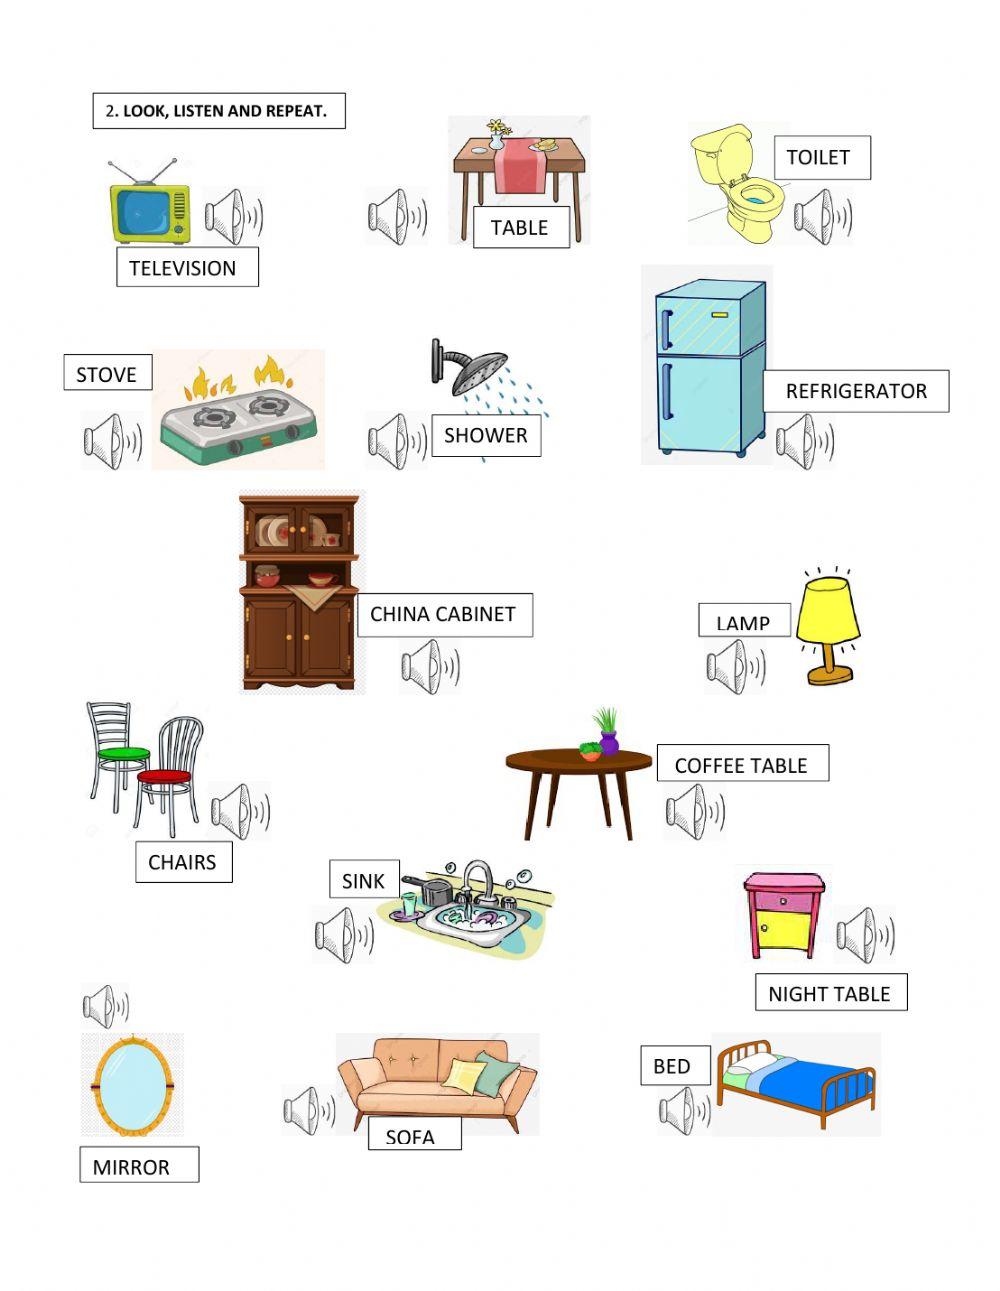 Parts of the house and objects.